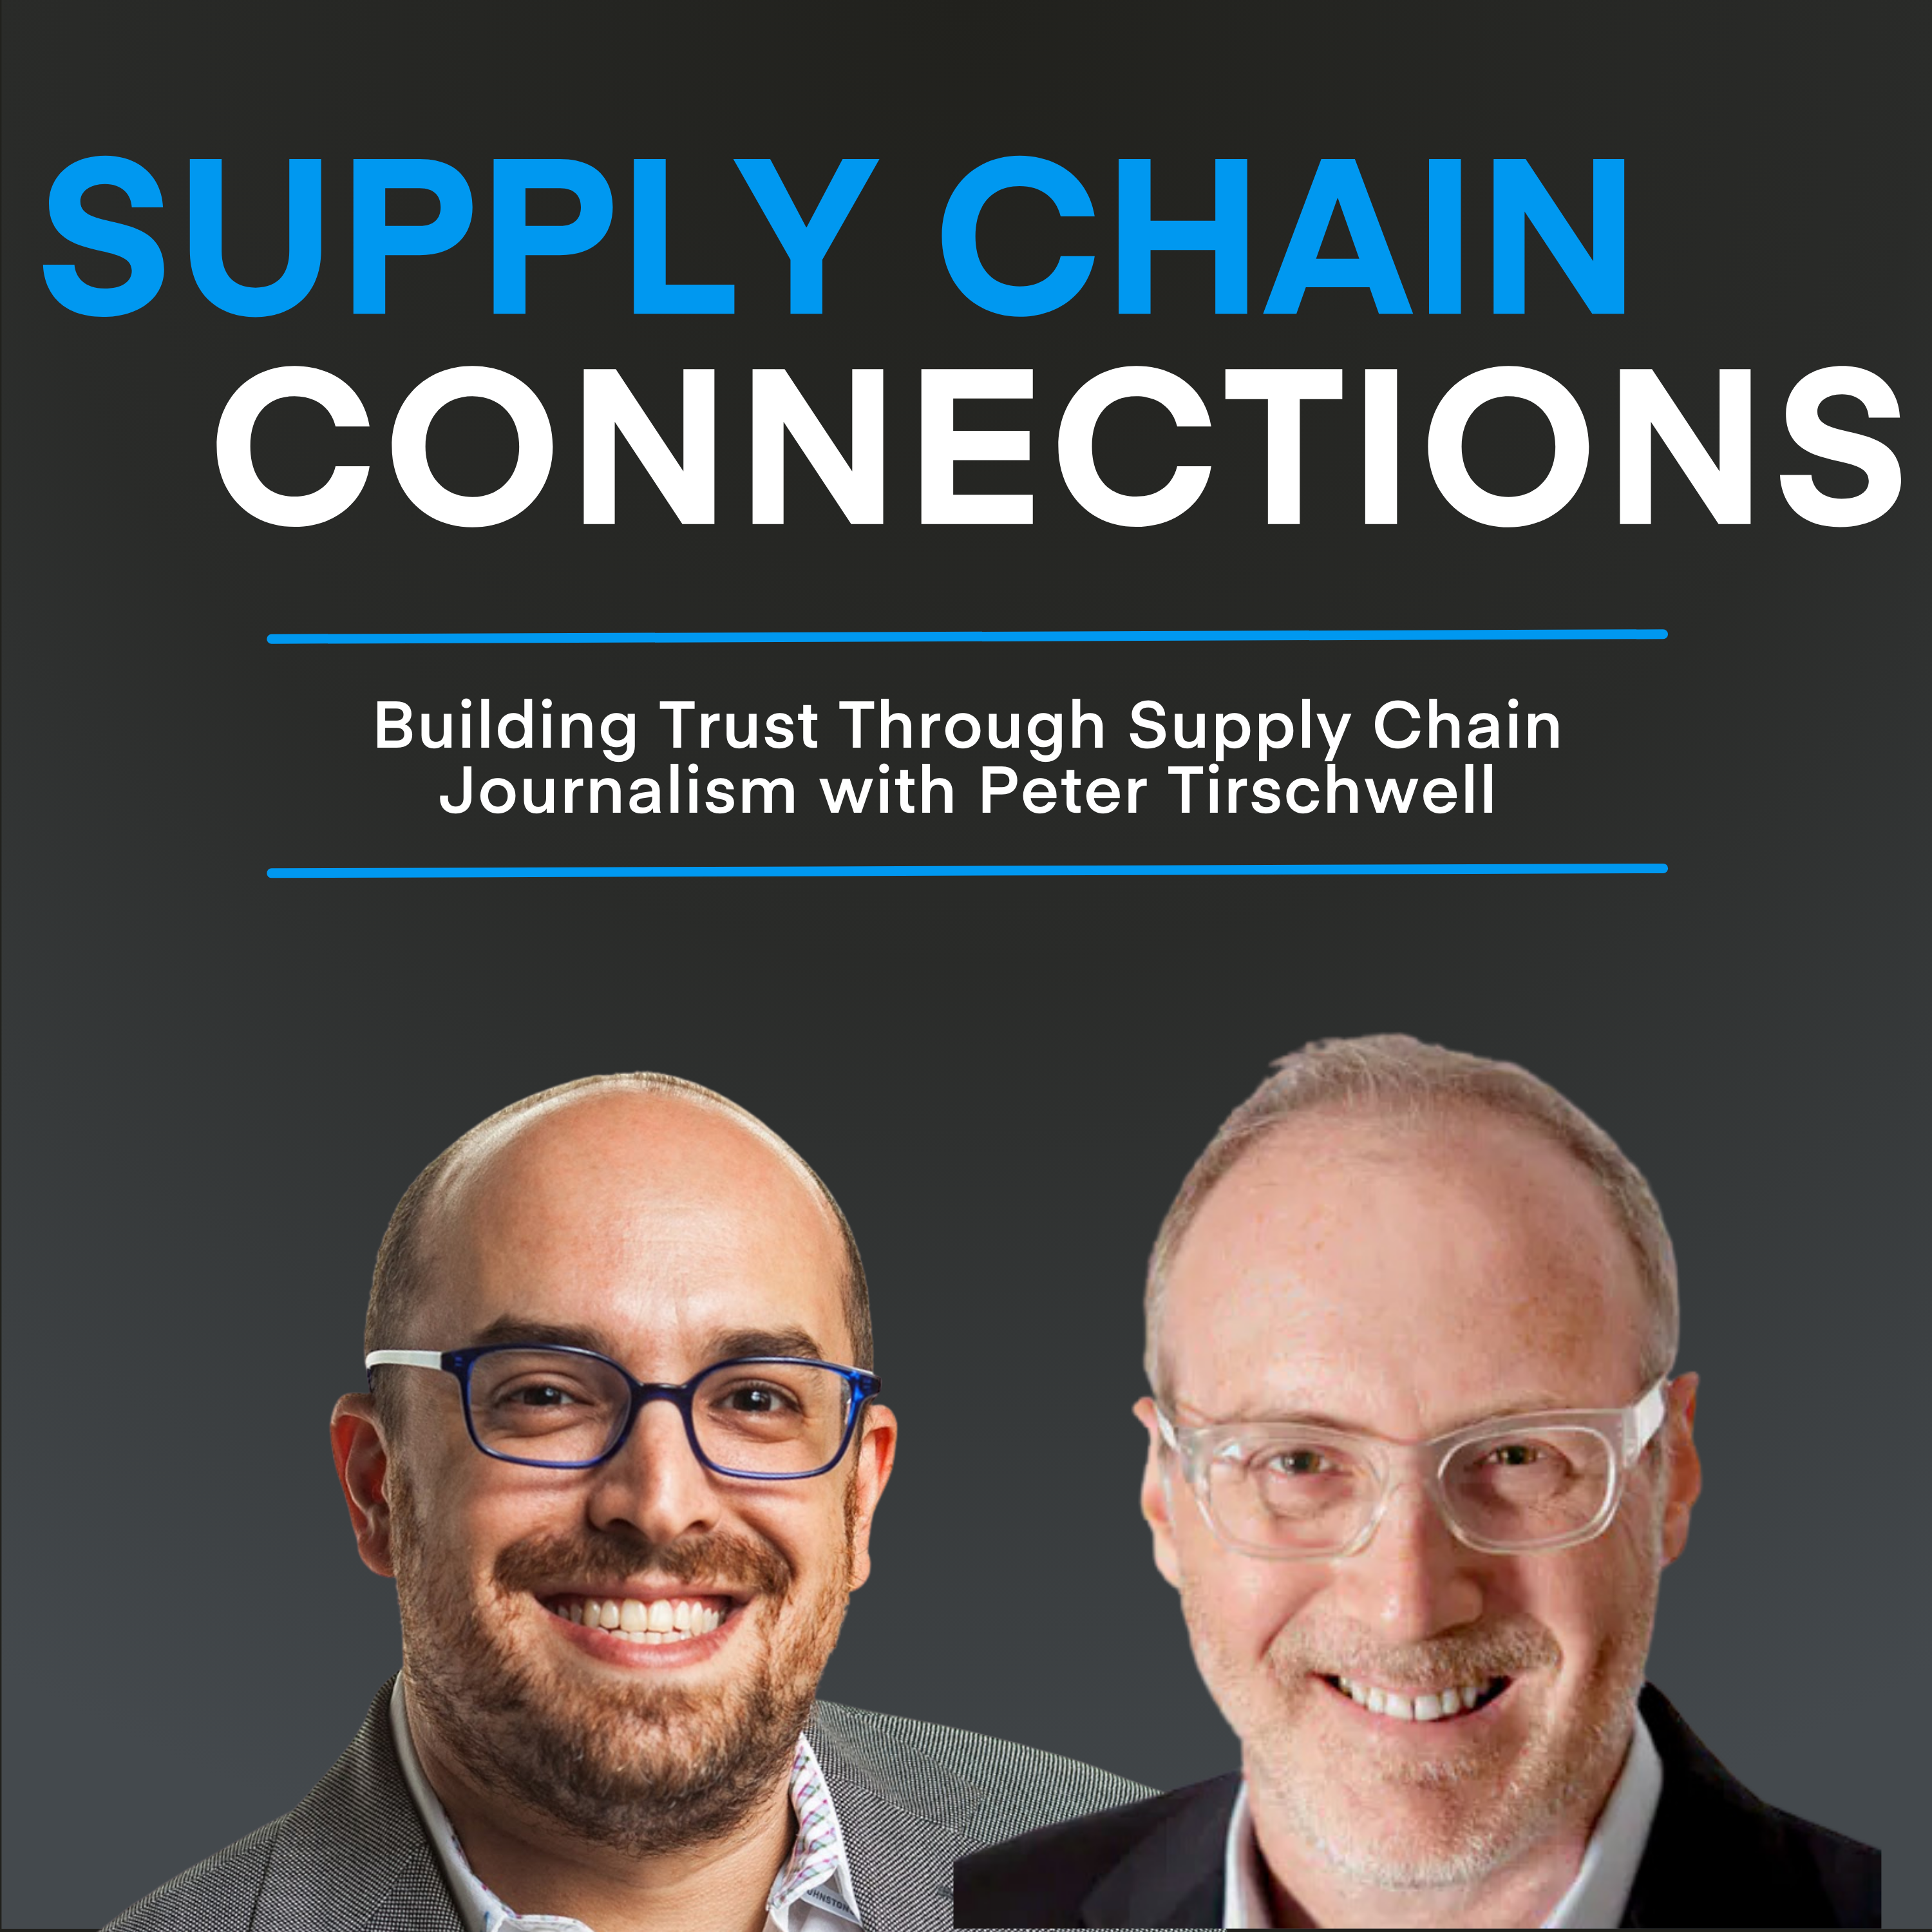 Building Trust Through Supply Chain Journalism with Peter Tirschwell